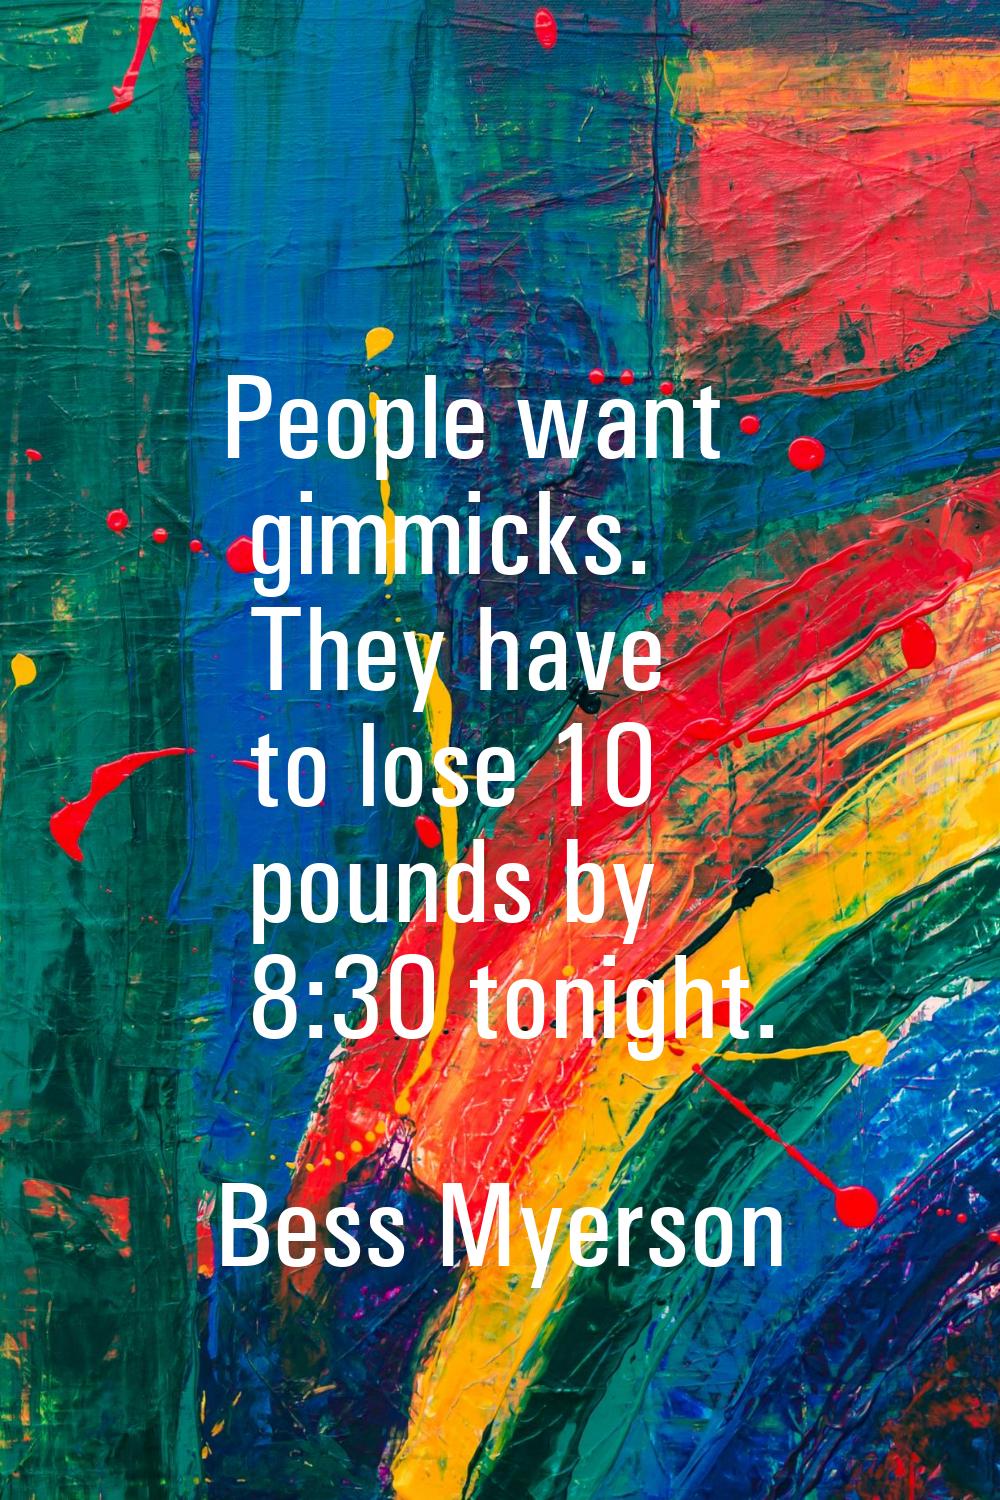 People want gimmicks. They have to lose 10 pounds by 8:30 tonight.